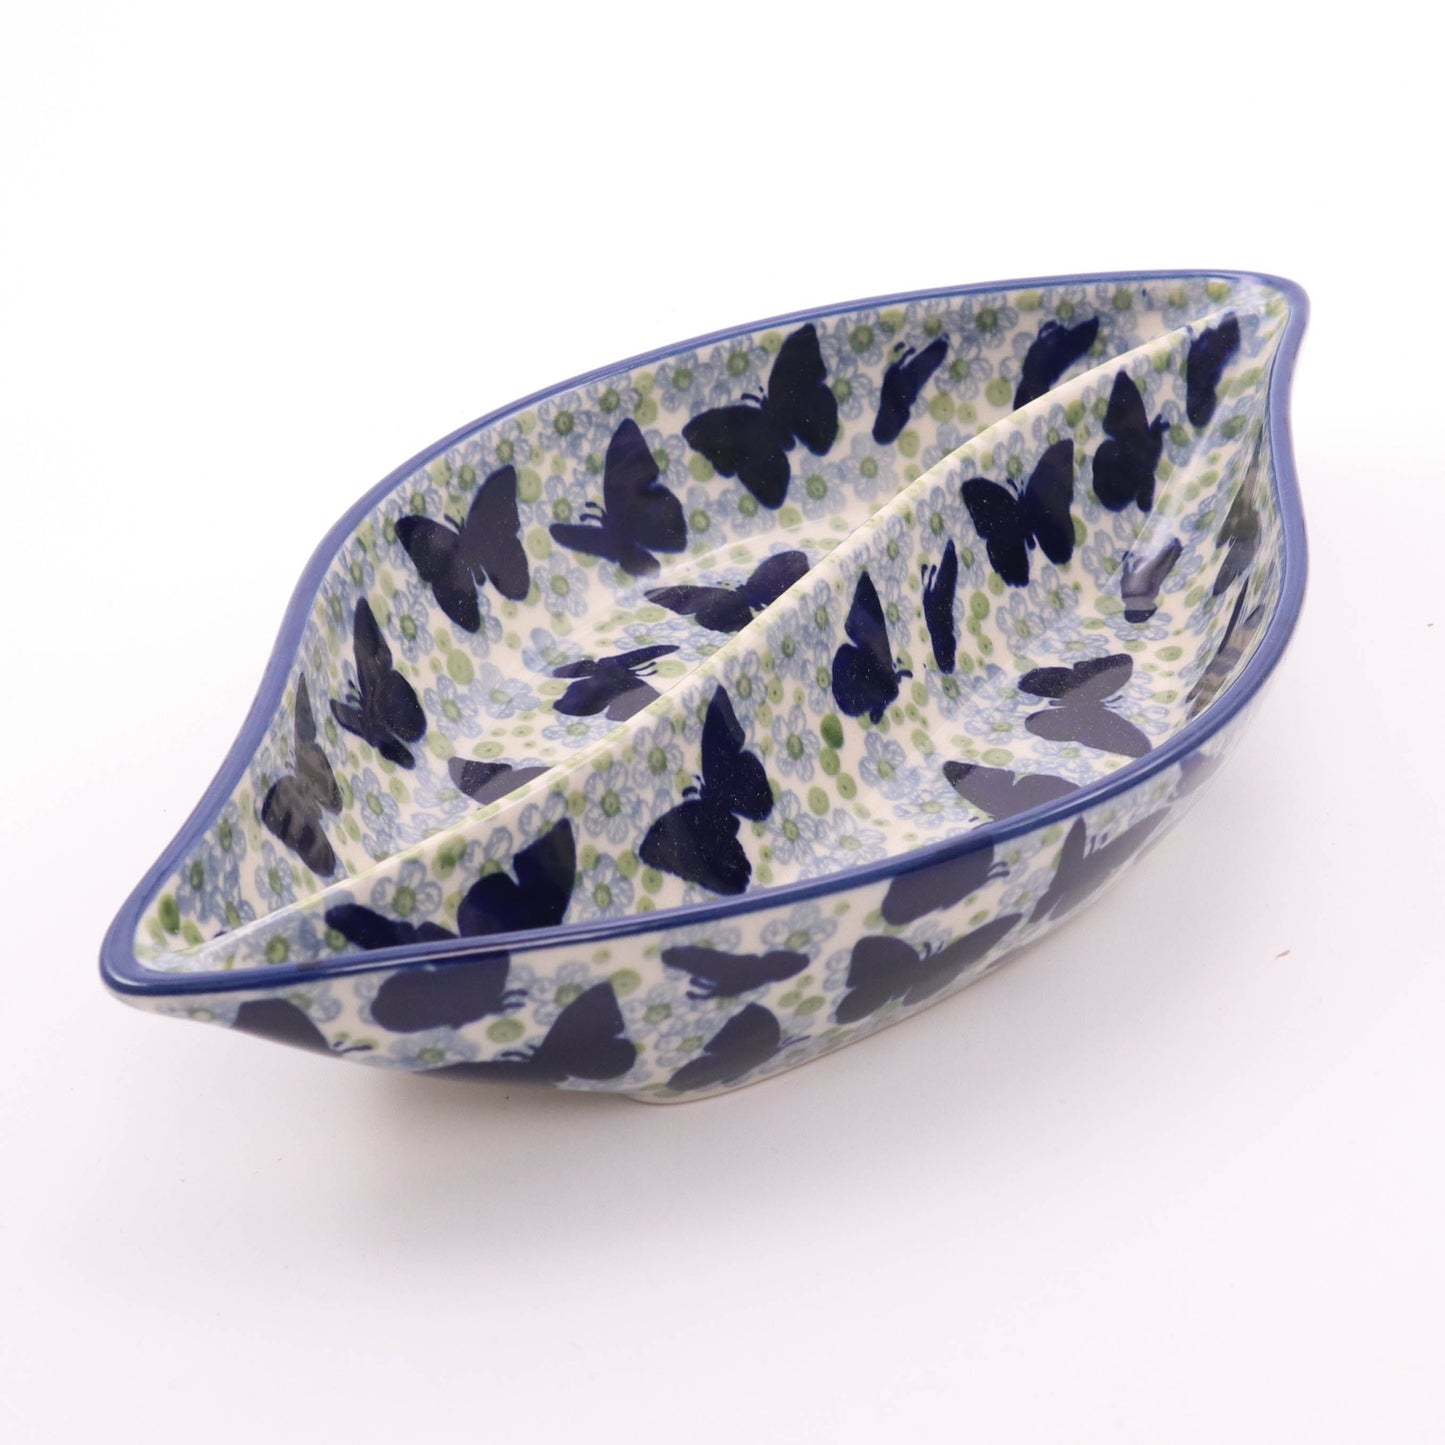 12"x6.5"x2" Divided Dish. Pattern: Butterfly In Green